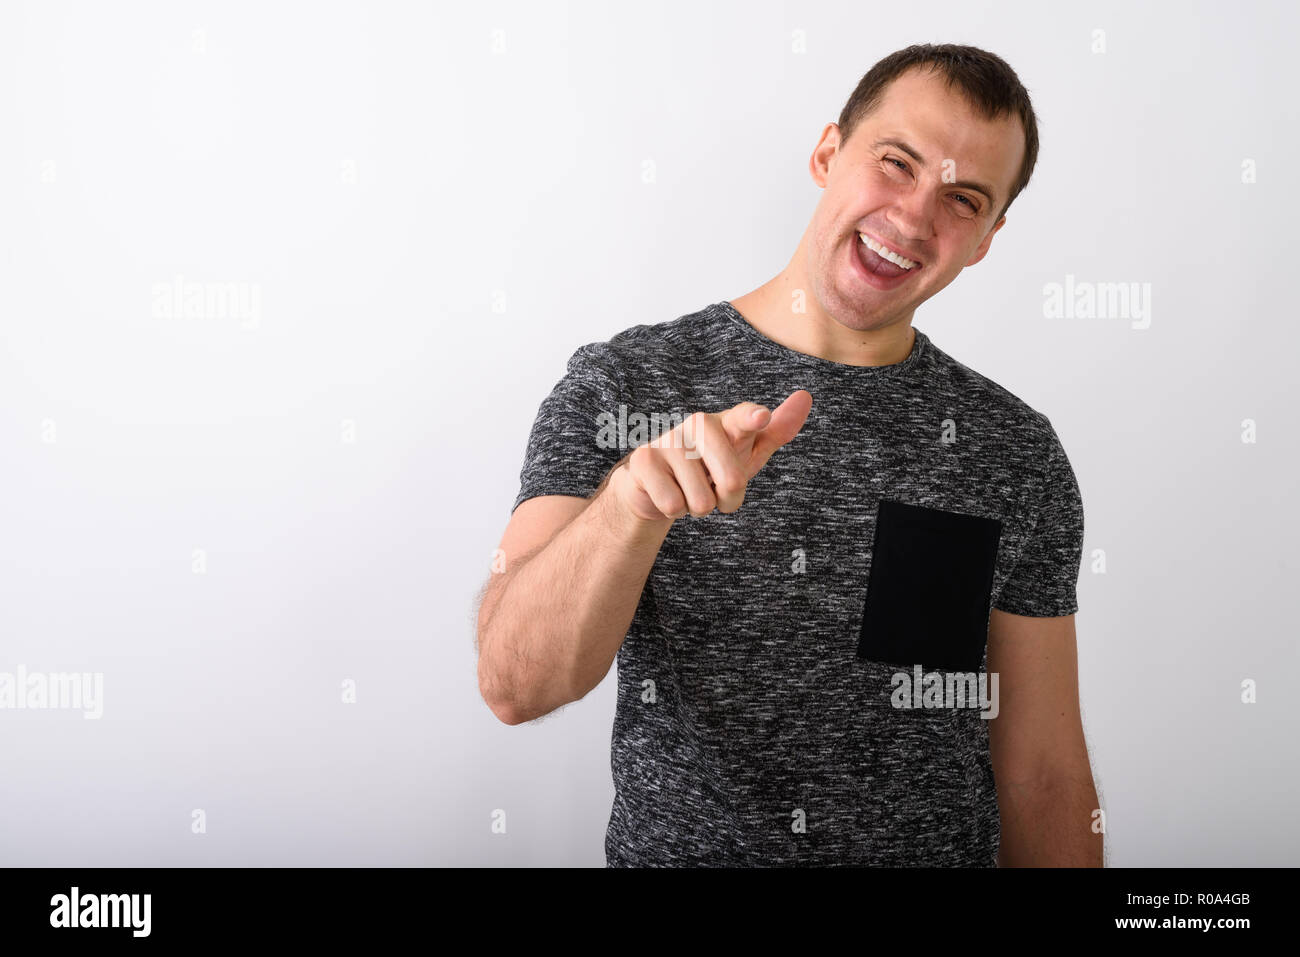 Studio shot of young happy muscular man smiling and laughing whi Stock Photo